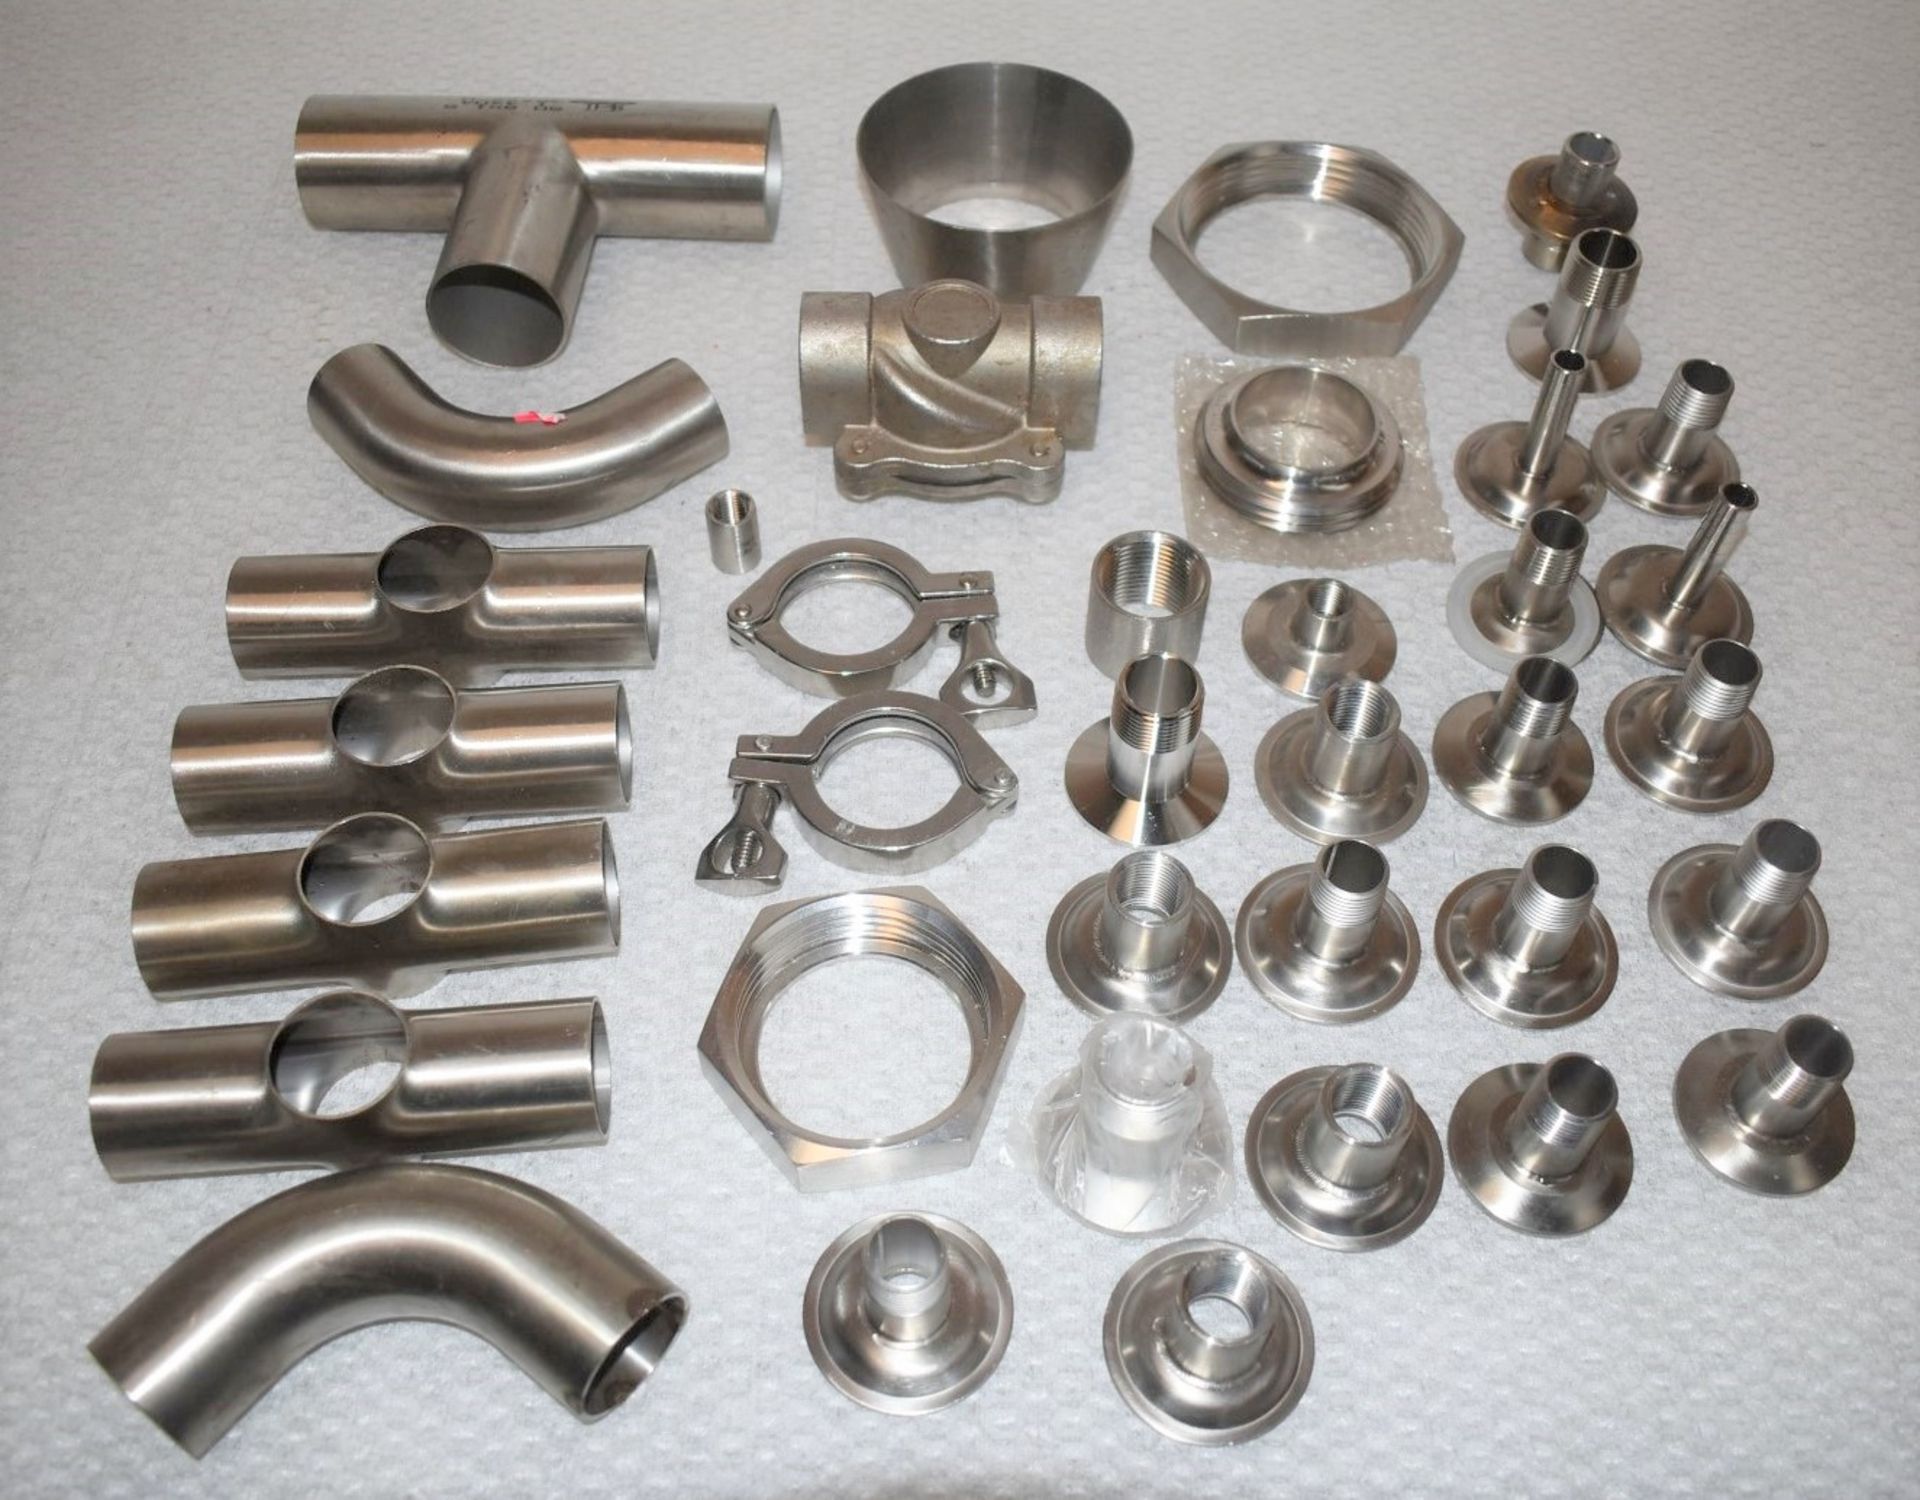 Assorted Job Lot of Stainless Steel Fittings For Brewery Equipment - Includes Approx 37 Pieces -